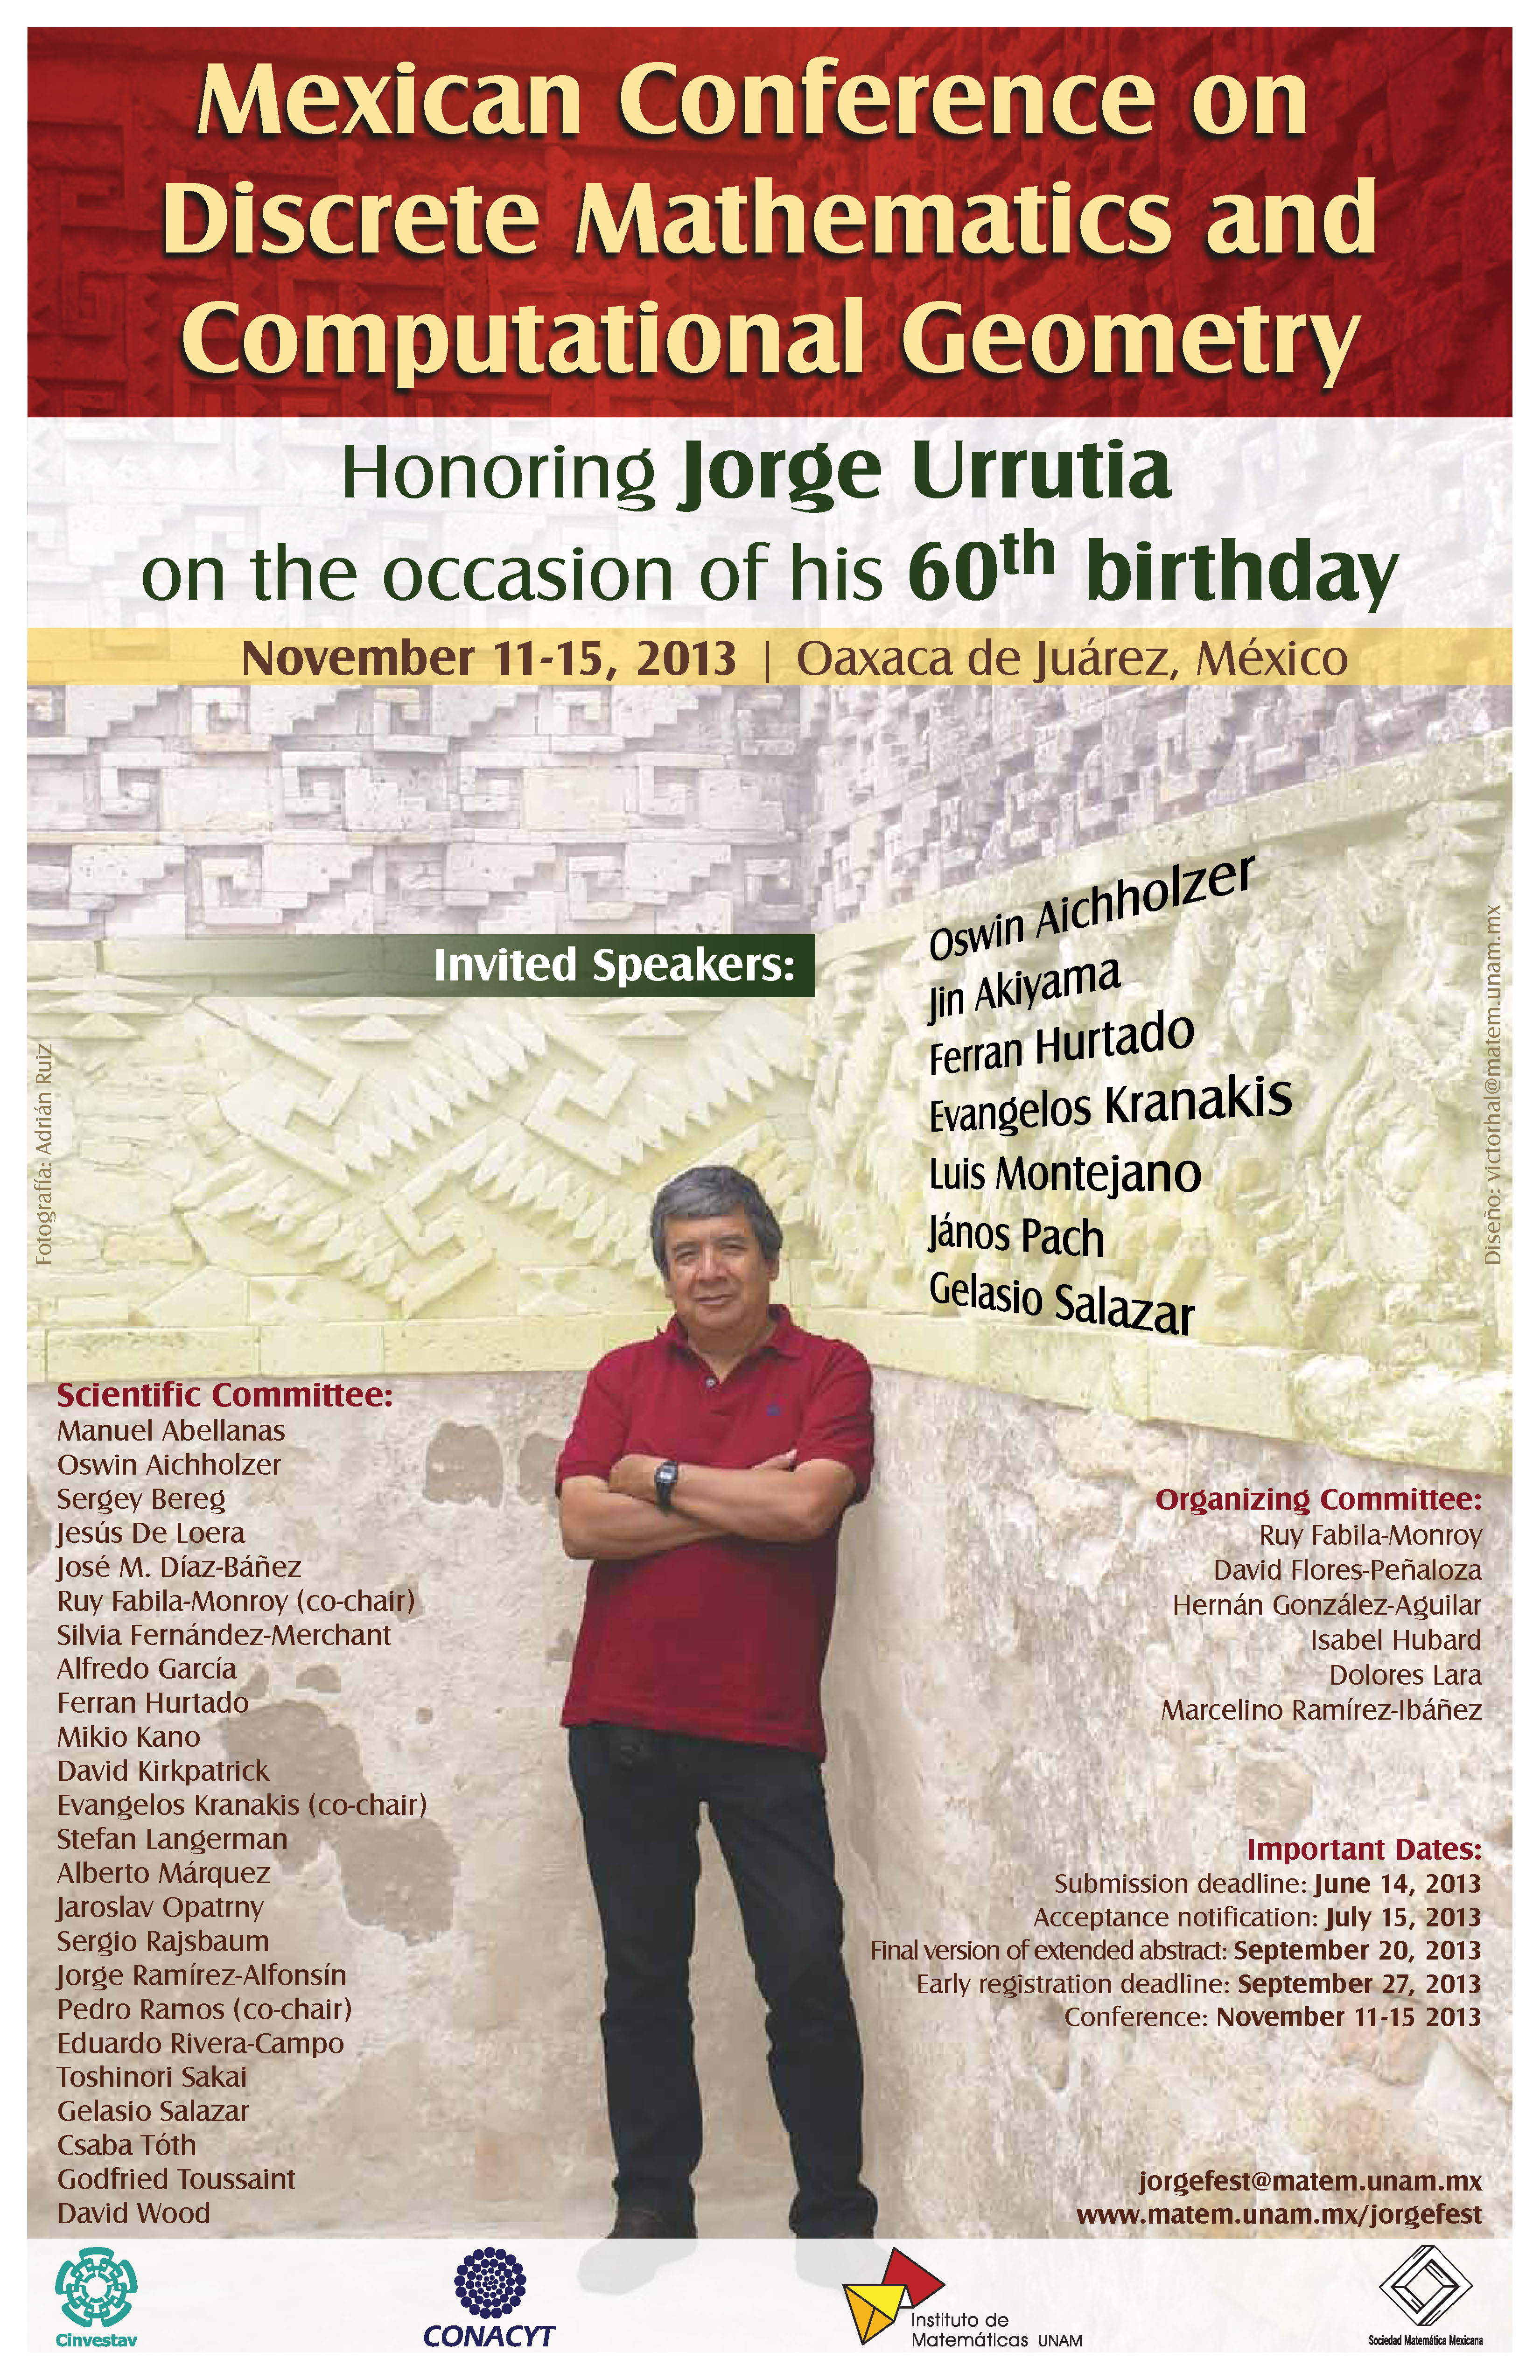 The Mexican Conference on Discrete Mathematics and Computational Geometry 